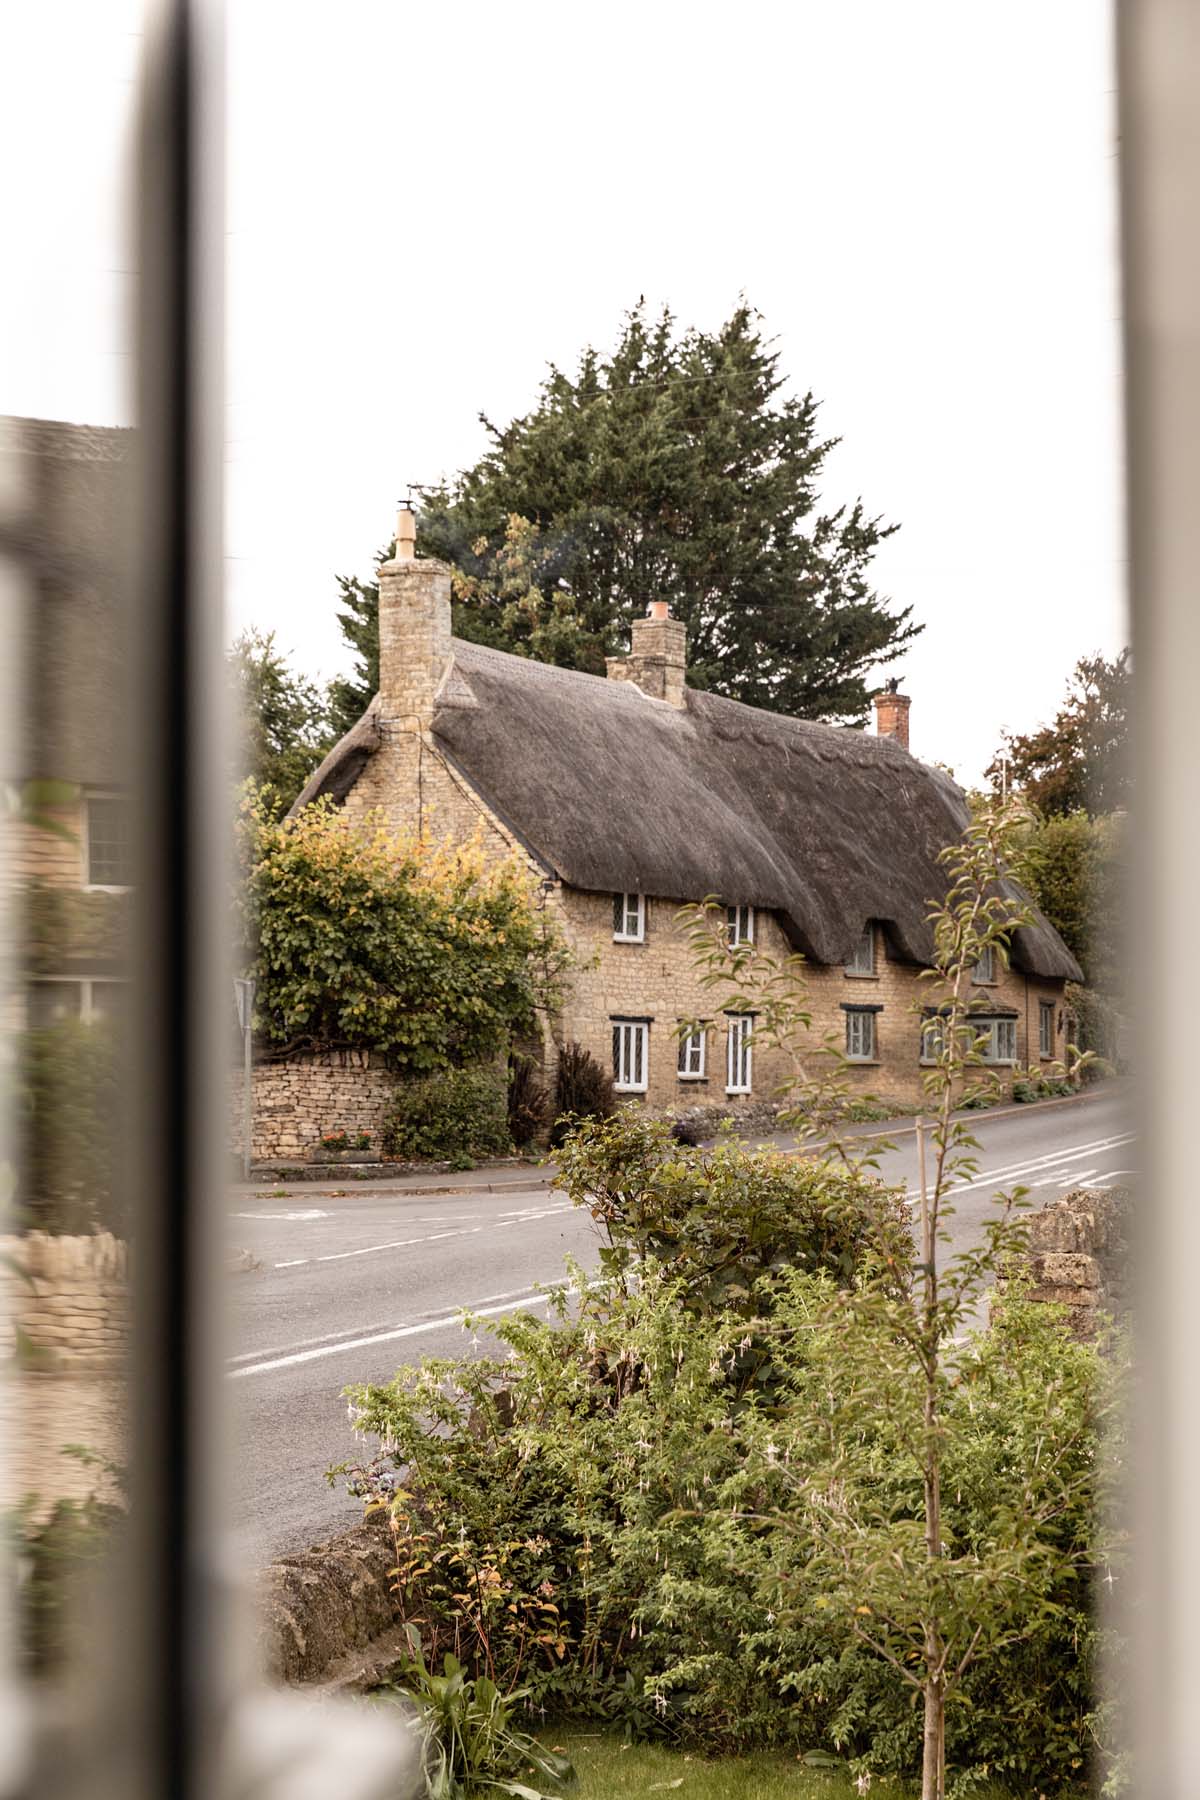 Street view of thatched cottages in Long Compton